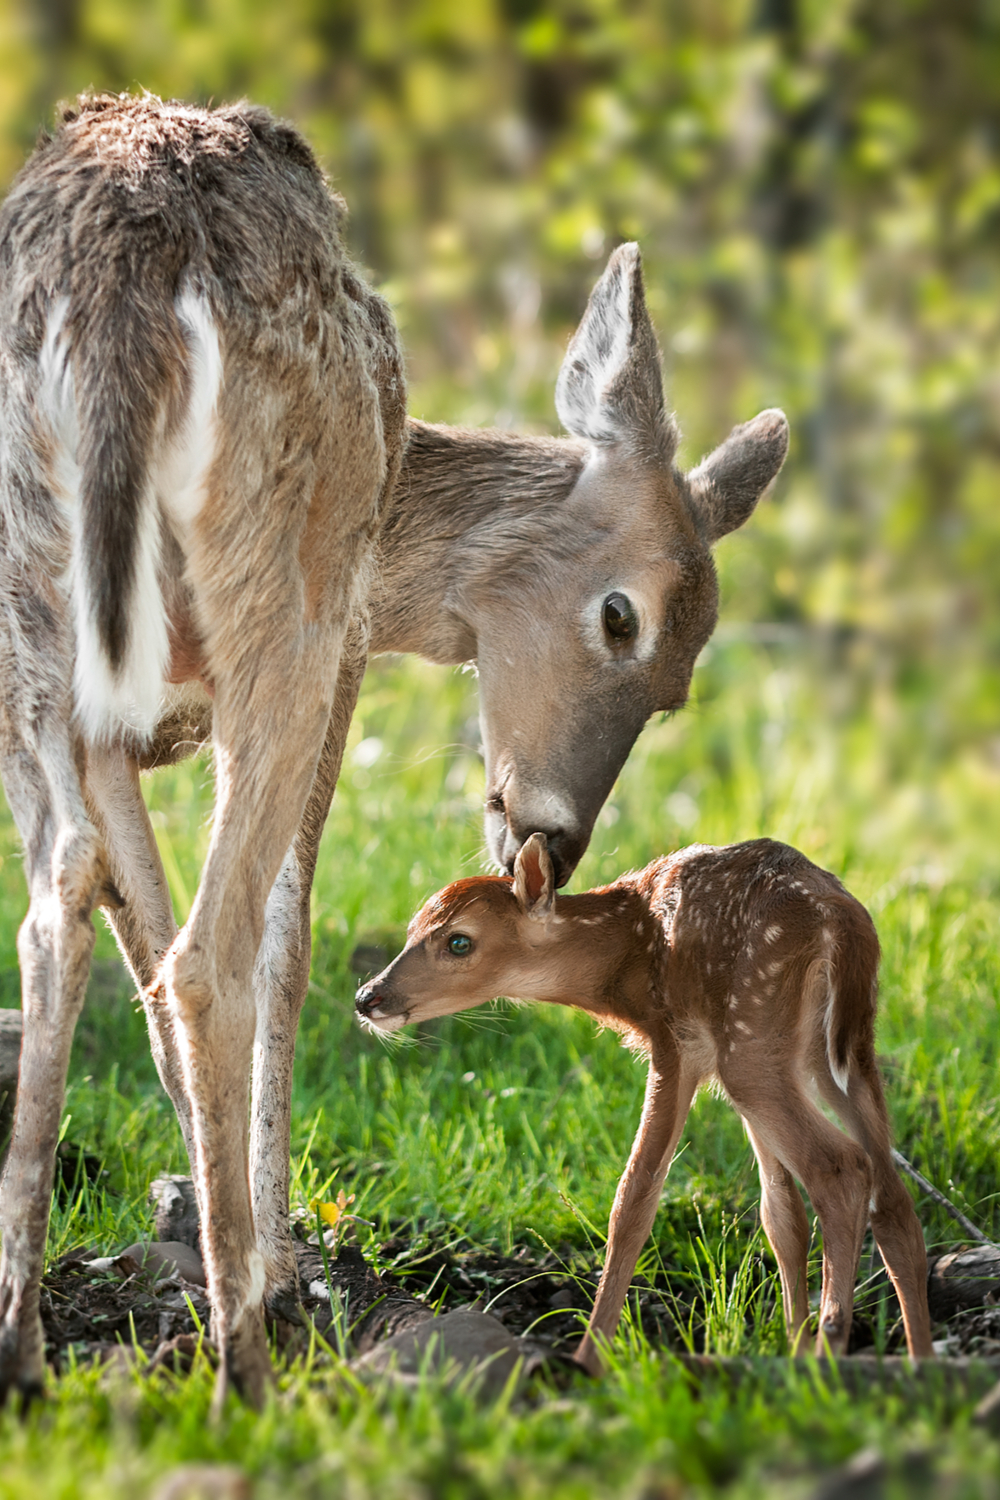 Dream About Deer With a Fawn